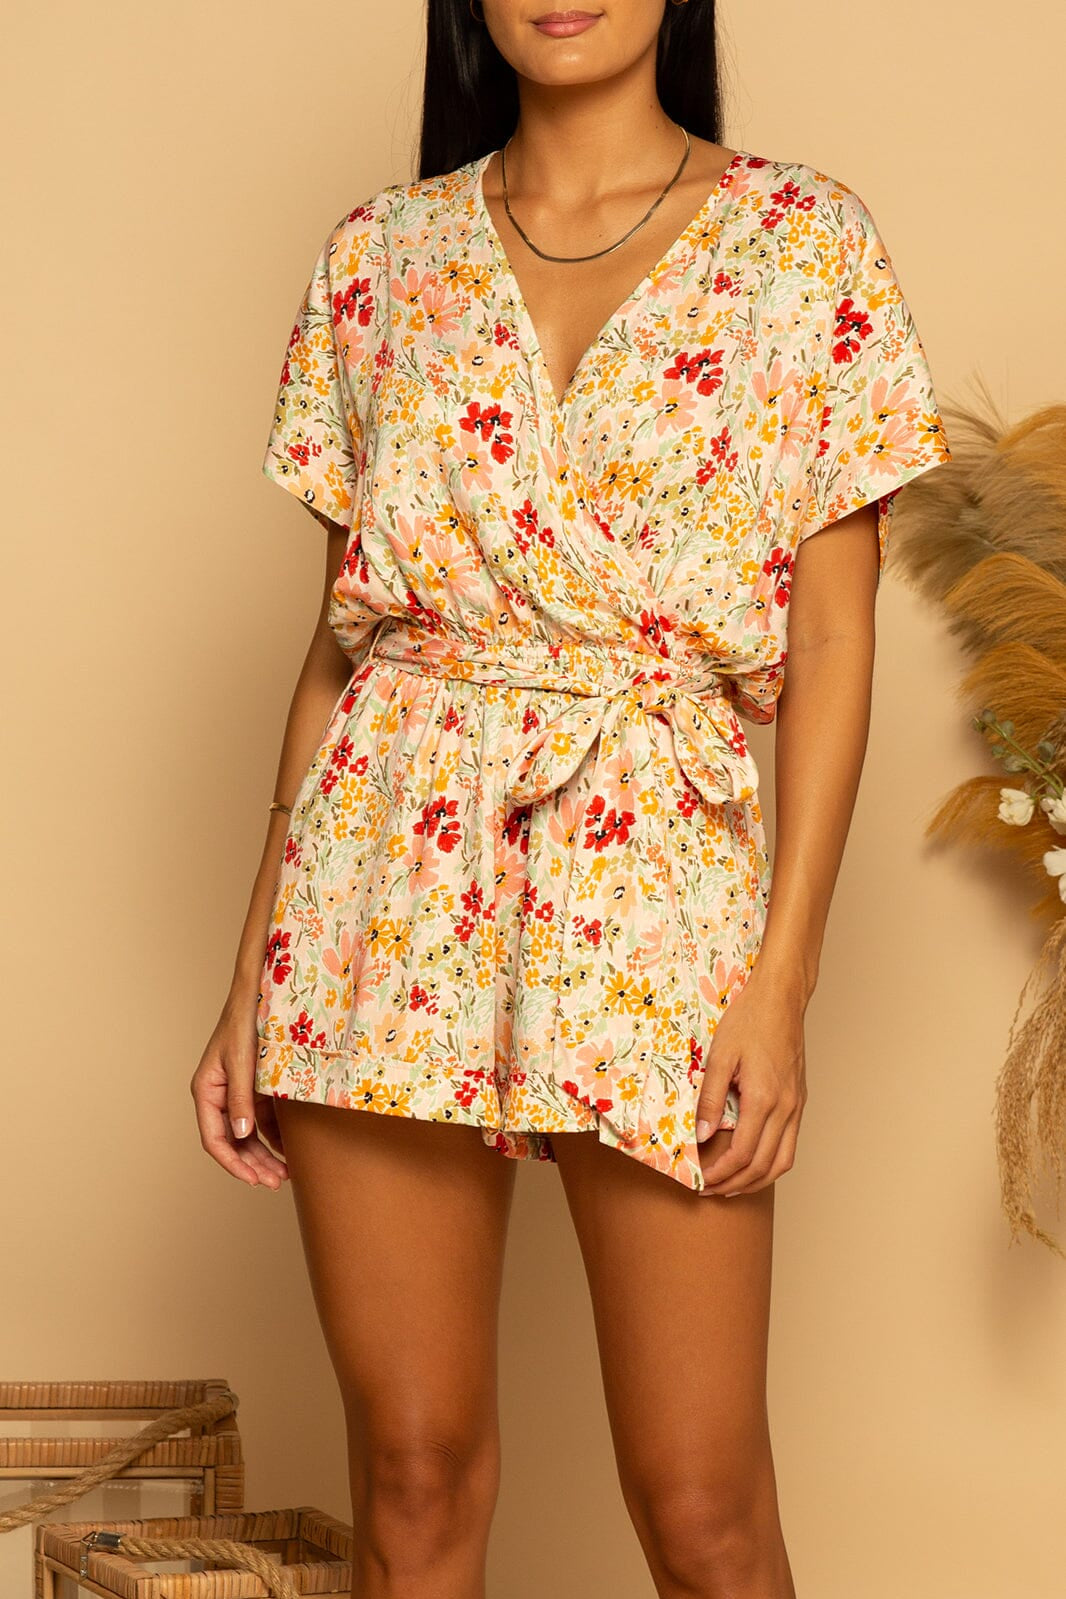 WILLOW ROMPER - MUDDLED BLOOM - XS